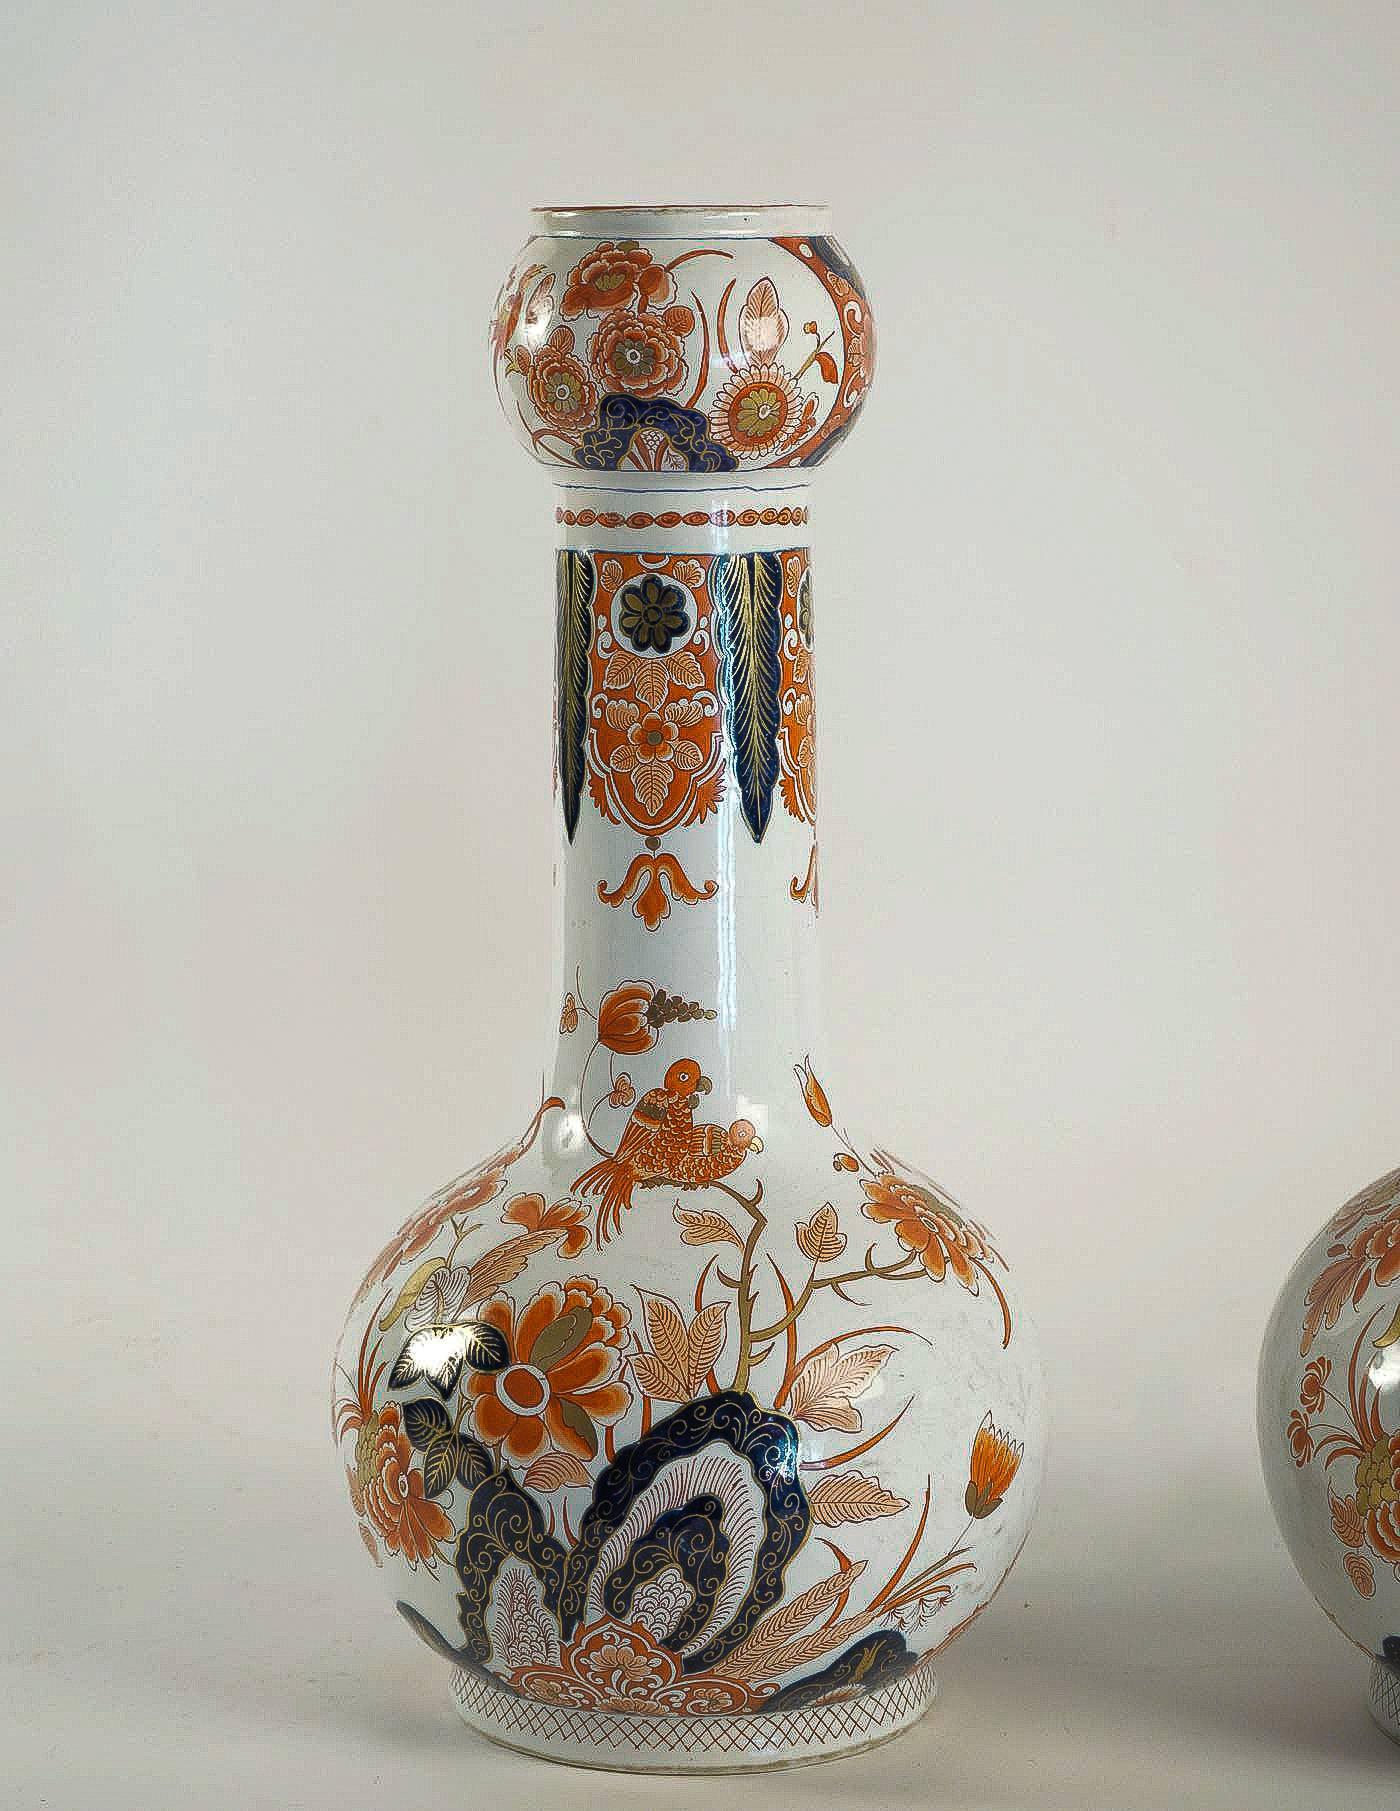 Polychromed Dutch Late 18th Century, Polychrome Delft Faience Pair of Gourd-Shaped Vases